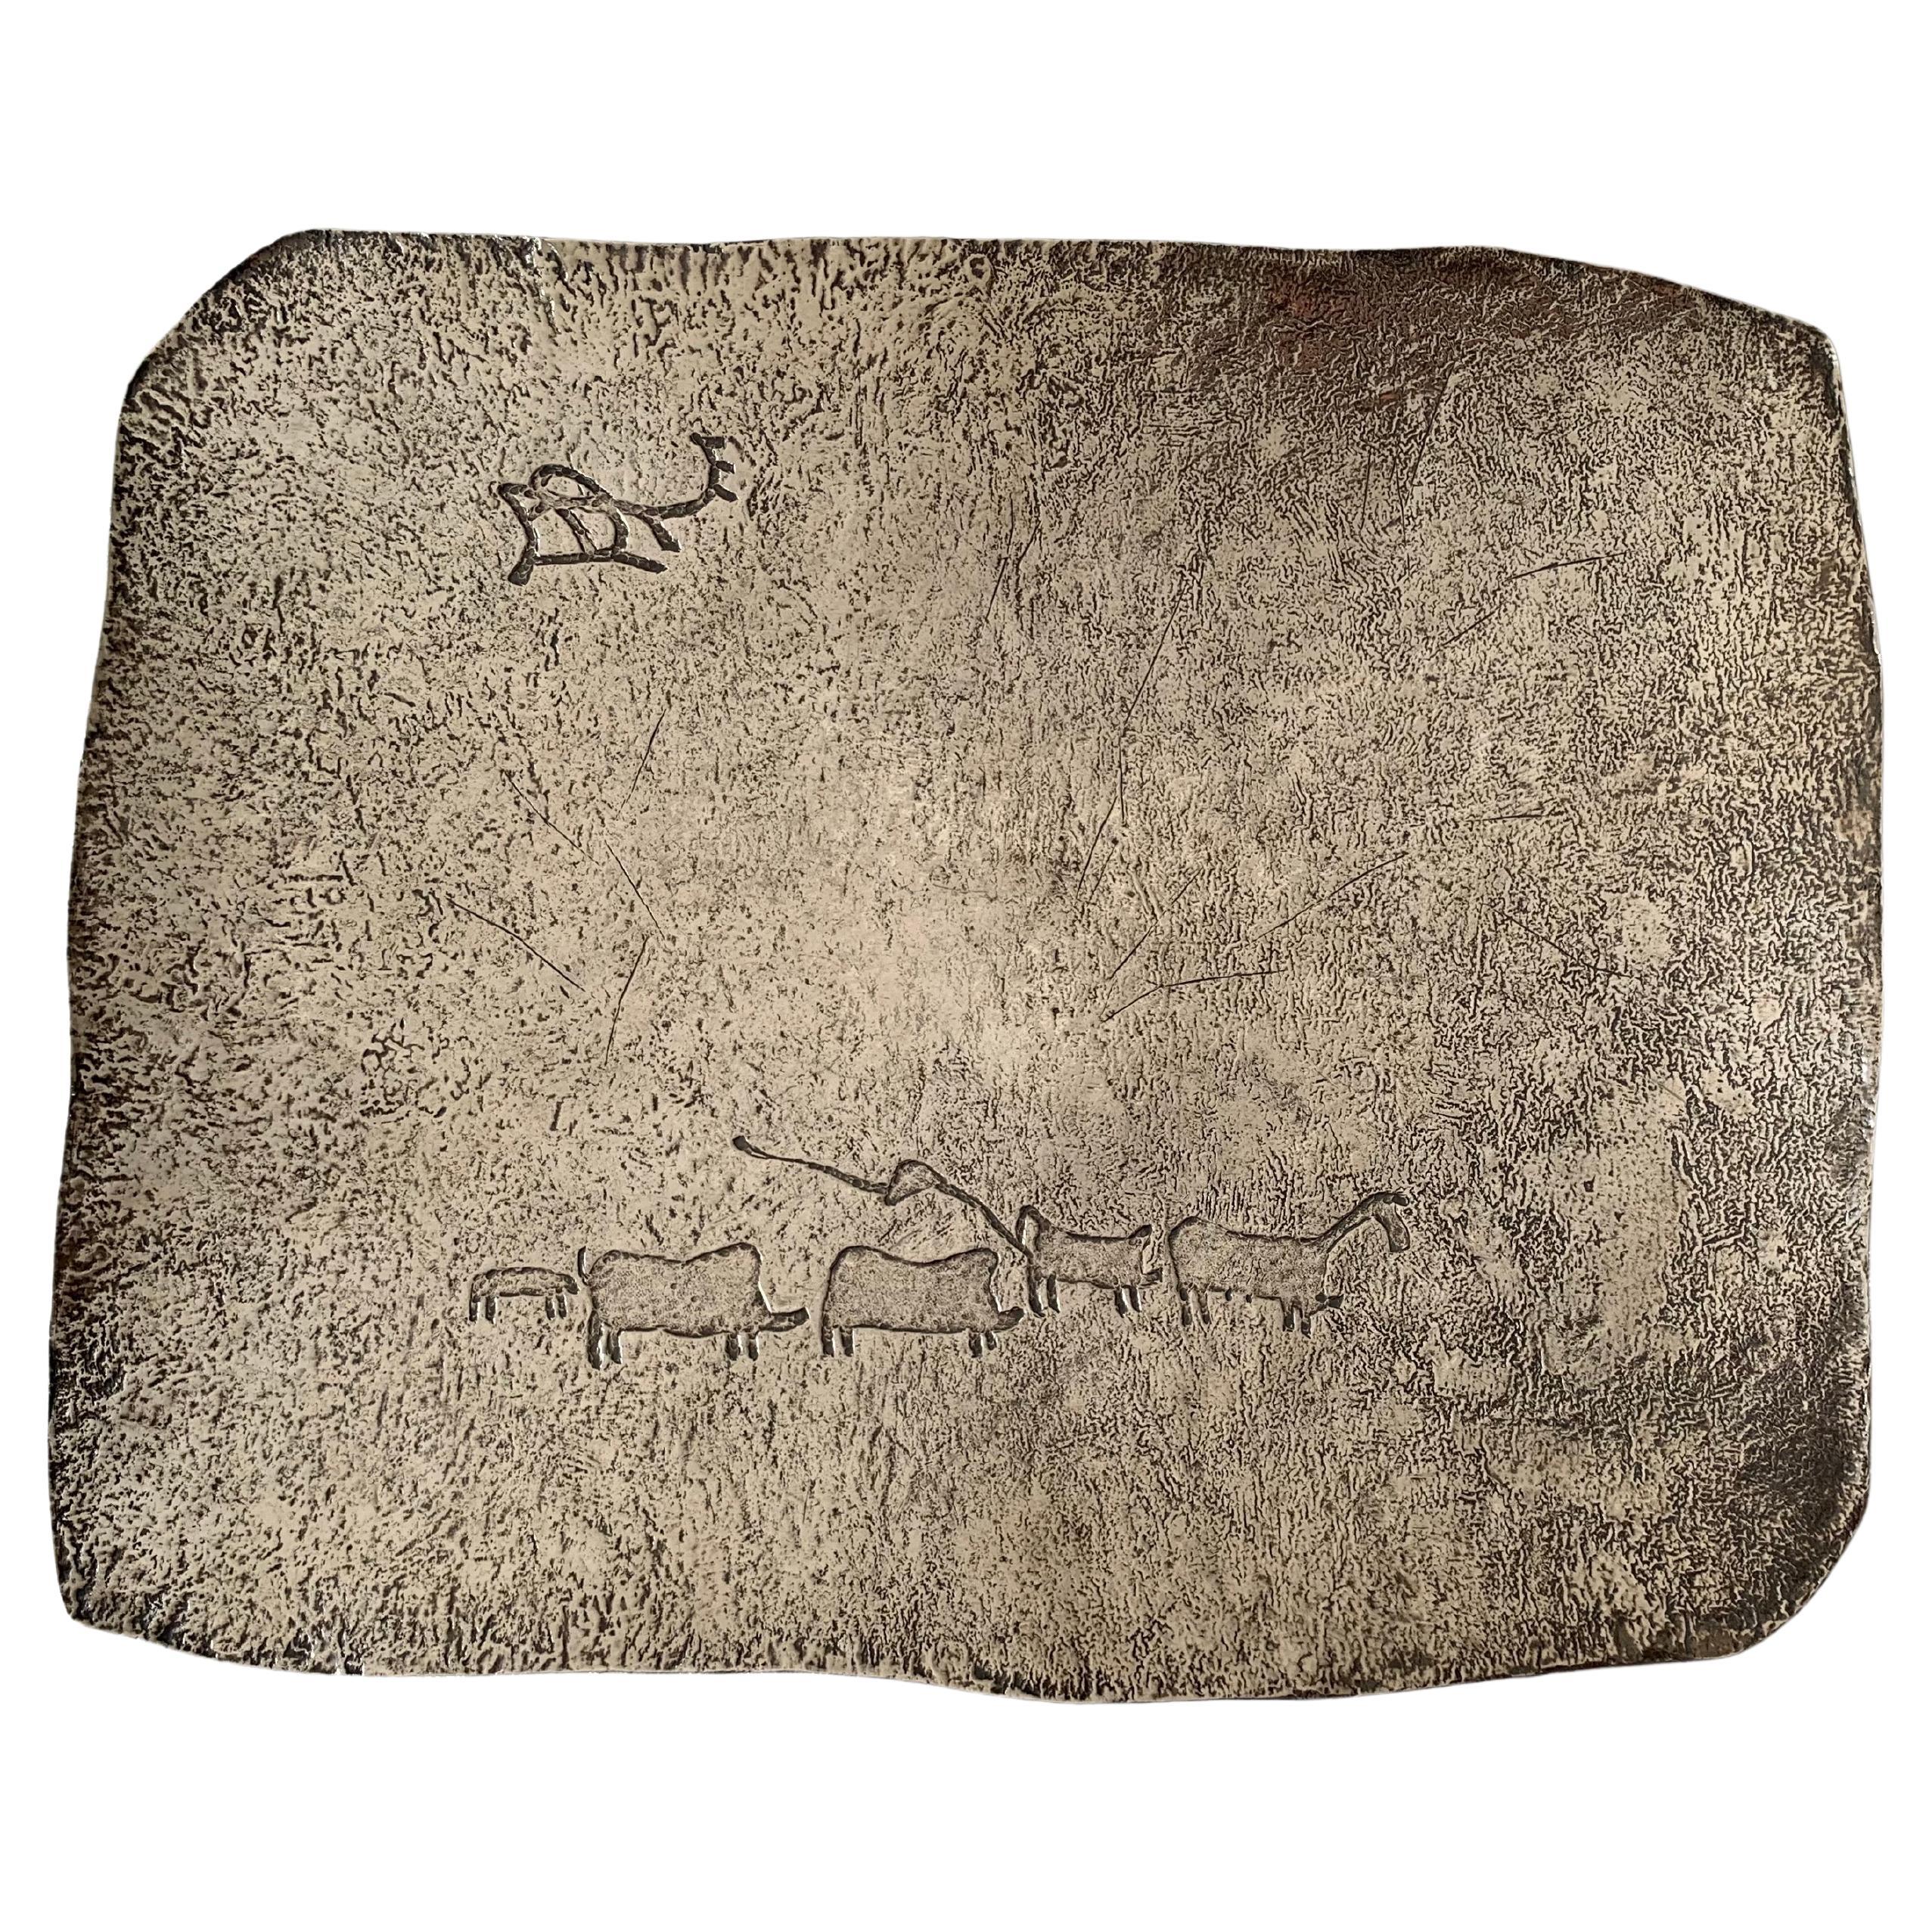 Vintage solid silver samorodok rectangular dish - an extremely rare tray or plate of a freeform rectangular shape with ancient cave painting inspired motifs of reindeer etc and raised on a polished footrim - the dish's textured decoration is